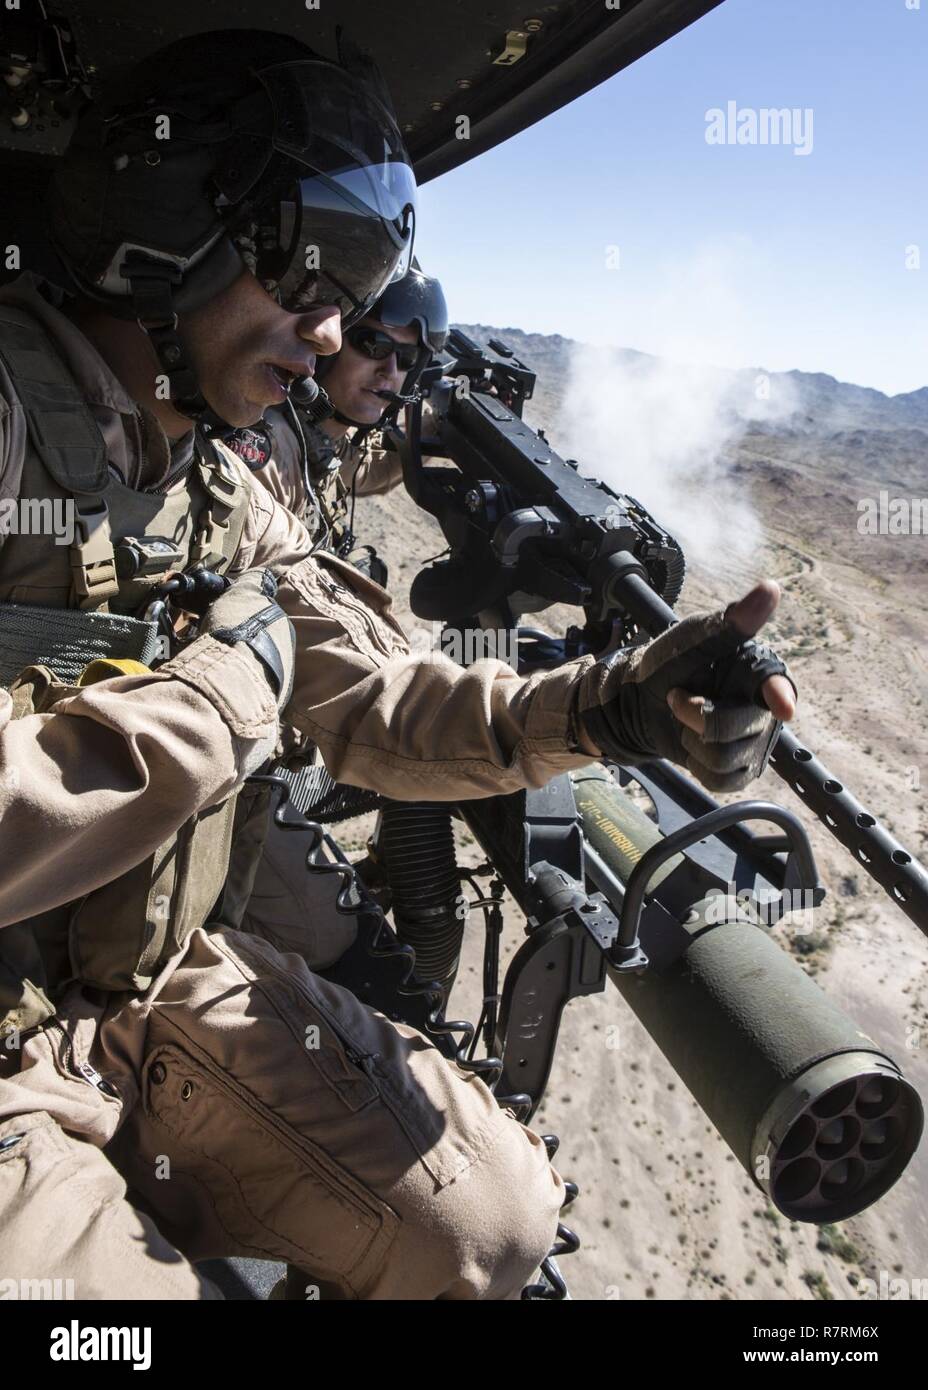 U.S. Marine Corps Staff Sgt. Jared Tape, crew chief with Marine Aviation Weapons and Tactics Squadron One (MAWTS-1), left, instructs U.S. Marine Corps Sgt. Paul Guillen, crew chief with Marine Light Attack Helicopter Squadron-169, right, on how to aim the GAU-21 during an aerial gunnery refinement at Weapons and Tactics Instructor Course (WTI) 2-17, at Chocolate Mountain Aerial Gunnery Range, Calif., April 5, 2017. WTI is a seven-week training event hosted by MAWTS-1 cadre, which emphasizes operational integration of the six functions of Marine Corps aviation in support of a Marine Air Ground  Stock Photo